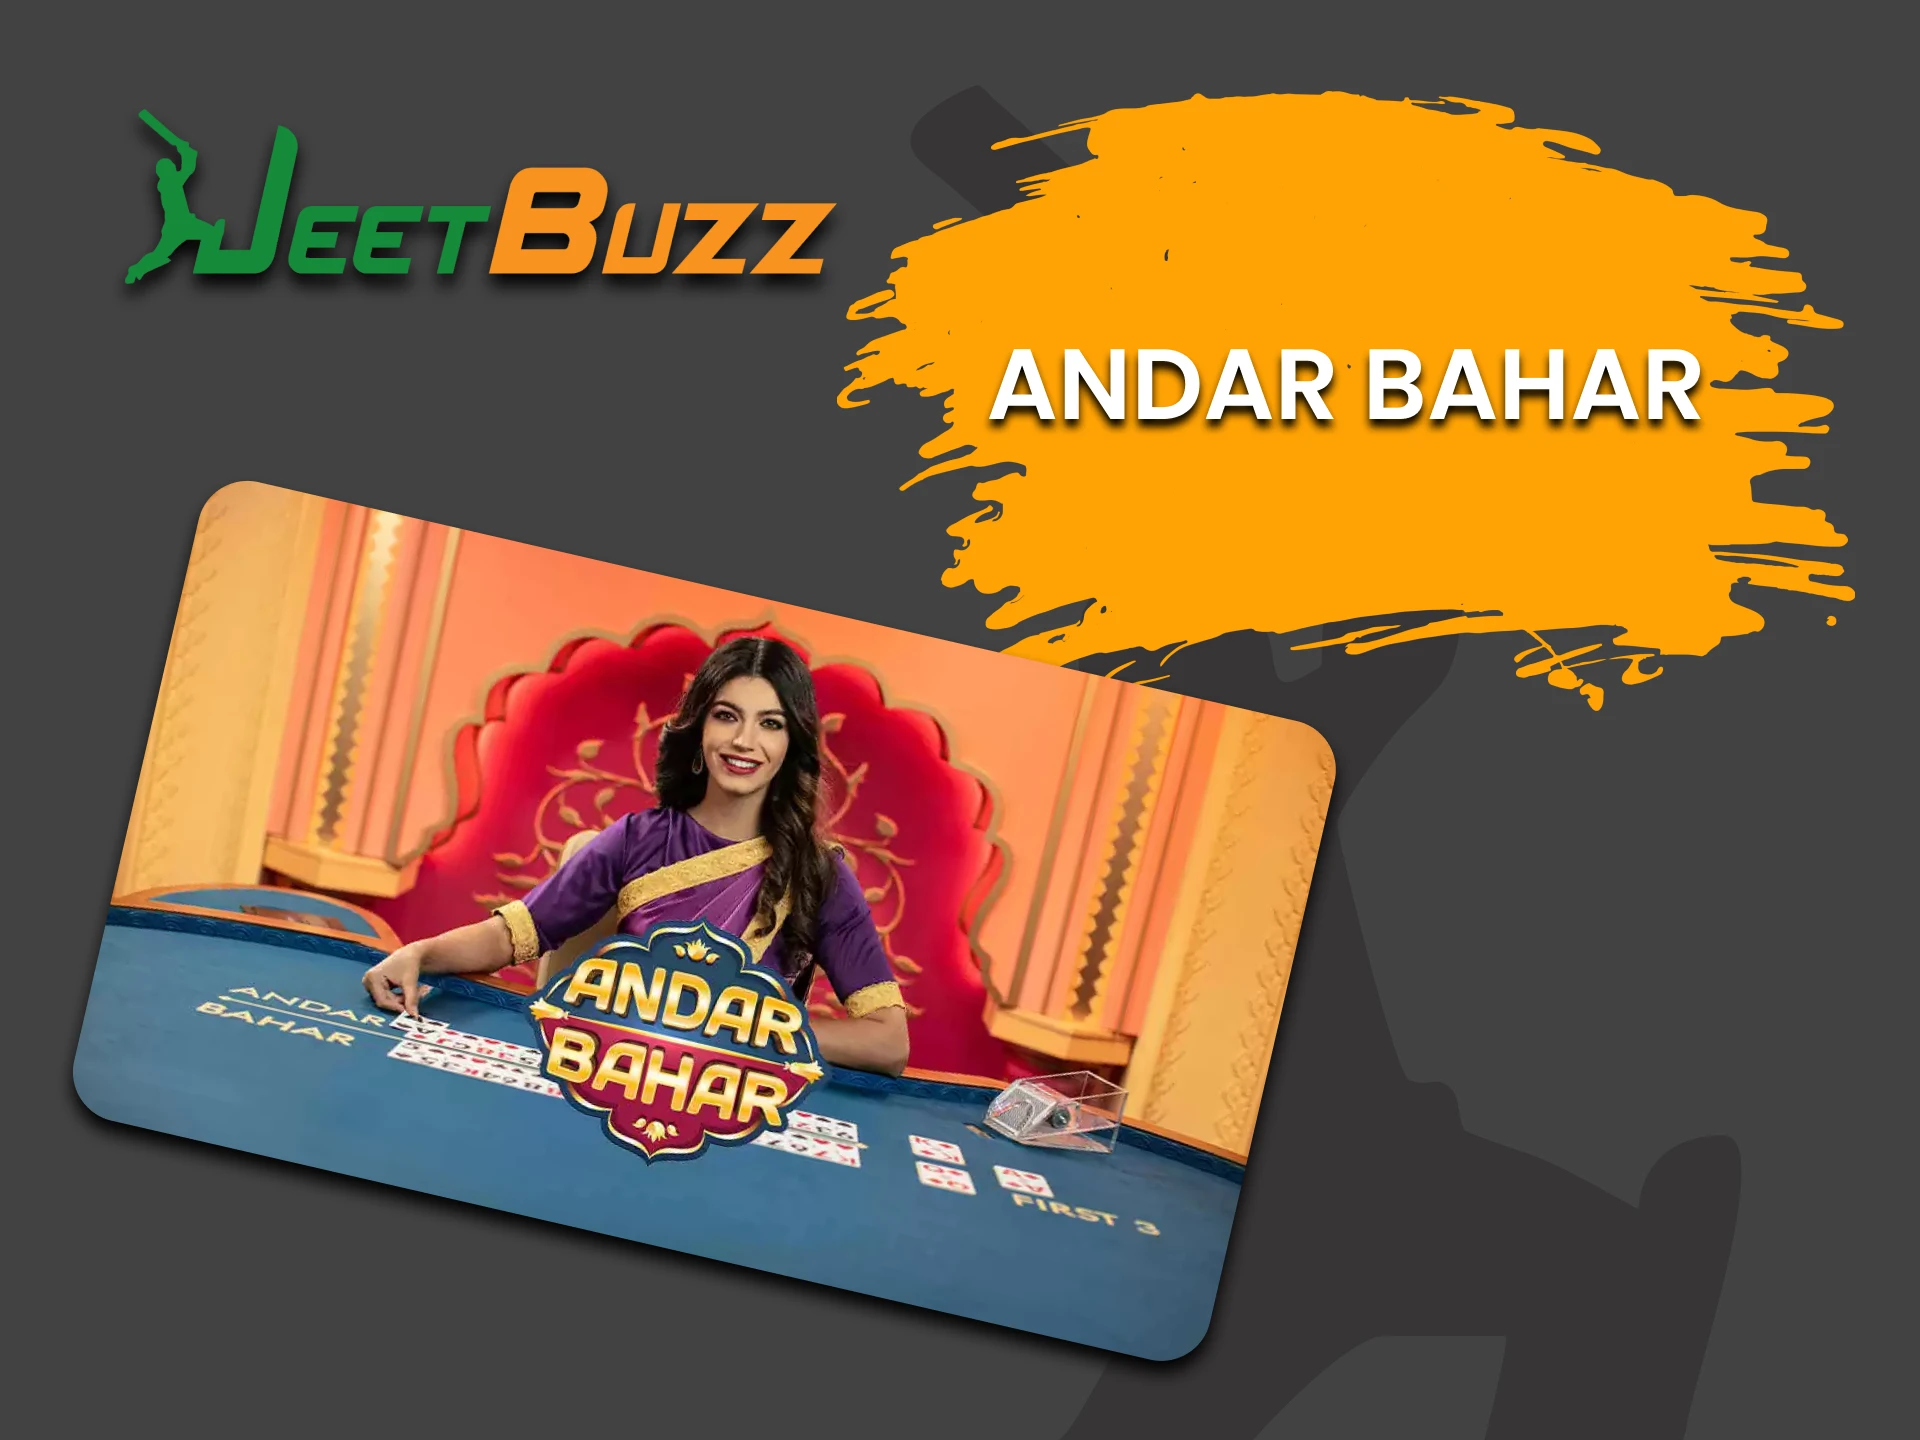 For table games from JeetBuzz, choose Andar Bahar.